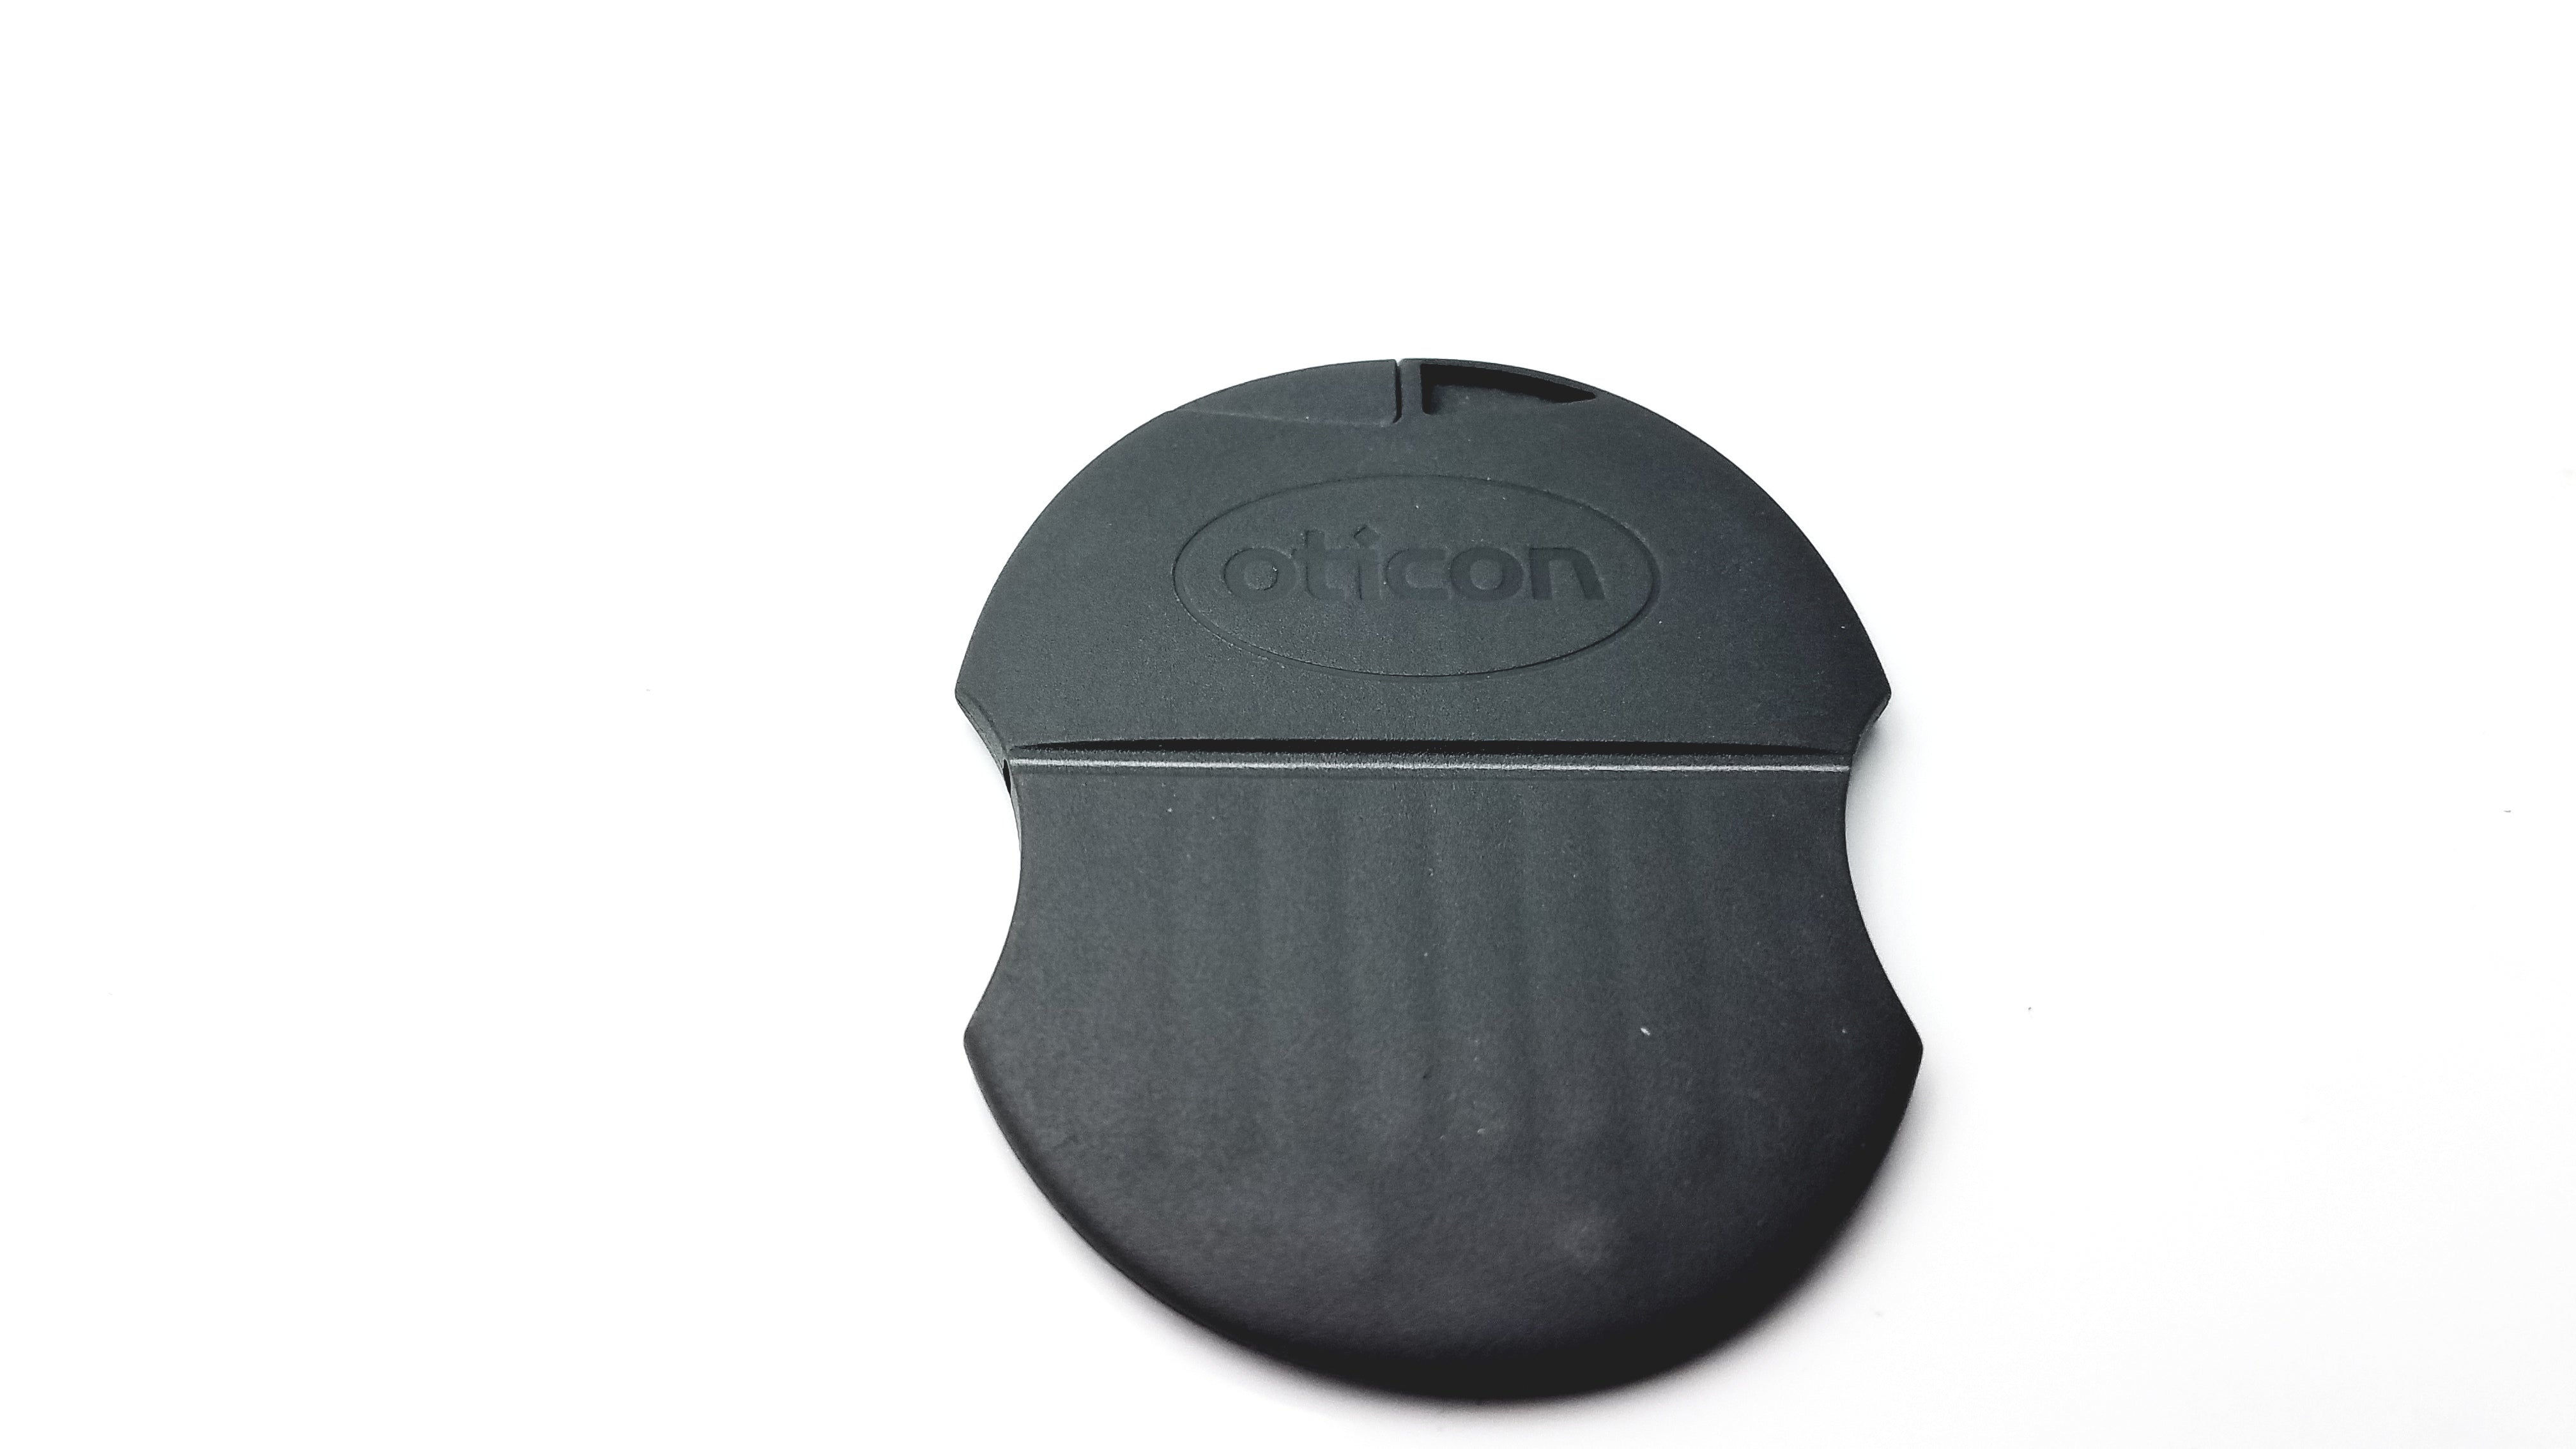 Load image into Gallery viewer, Oticon T-Cap Microphone Cover For Heading Aids Beige